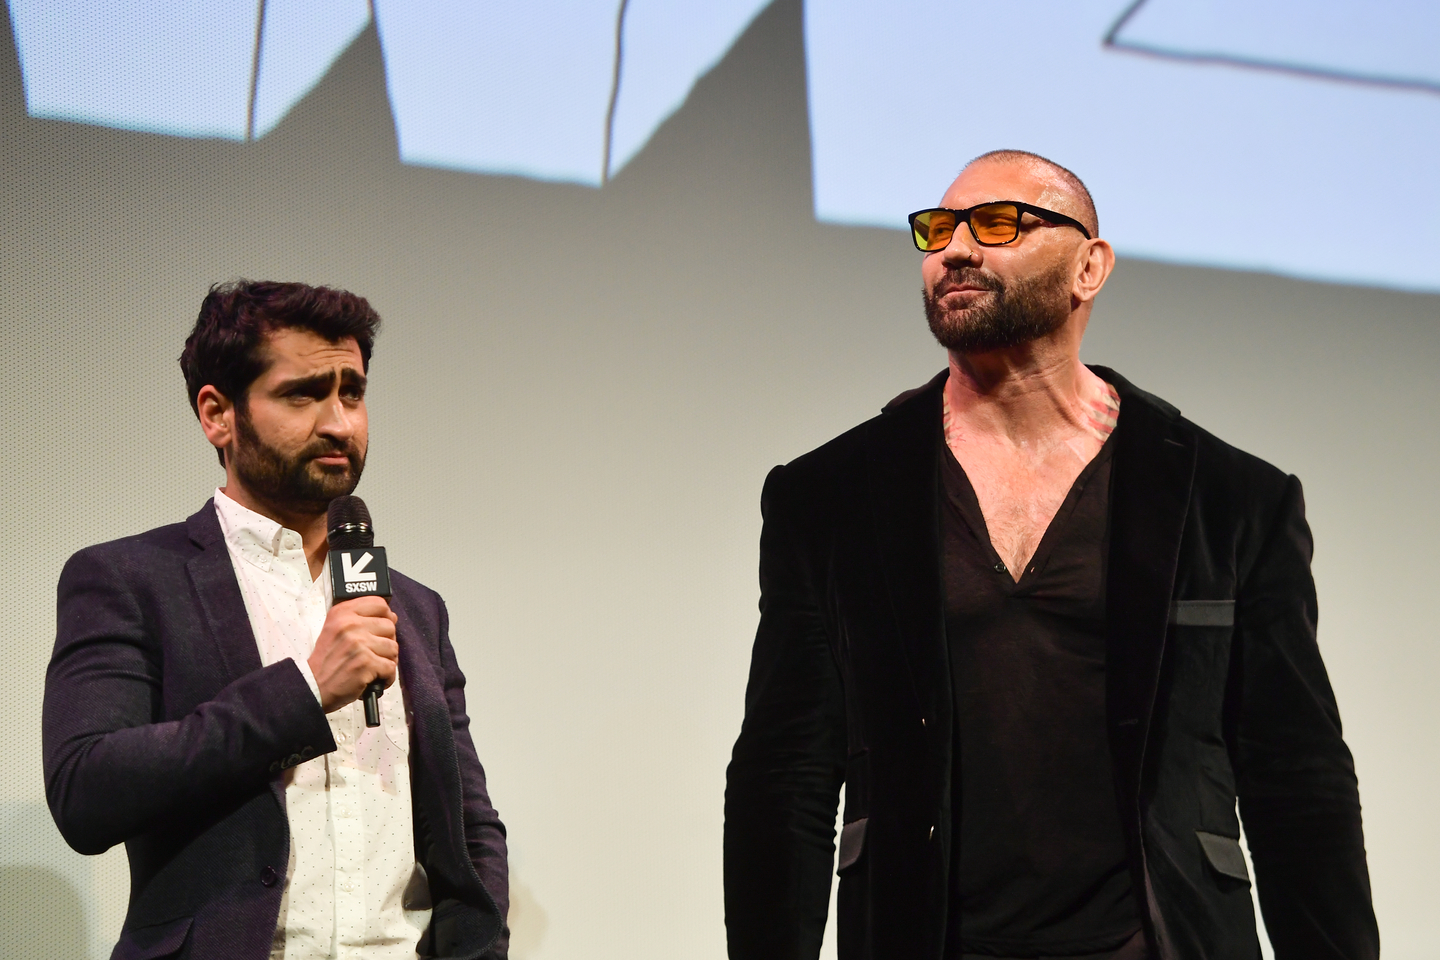 Kumail Nanjiani and Dave Bautista attend the Stuber screening at the Paramount Theatre.